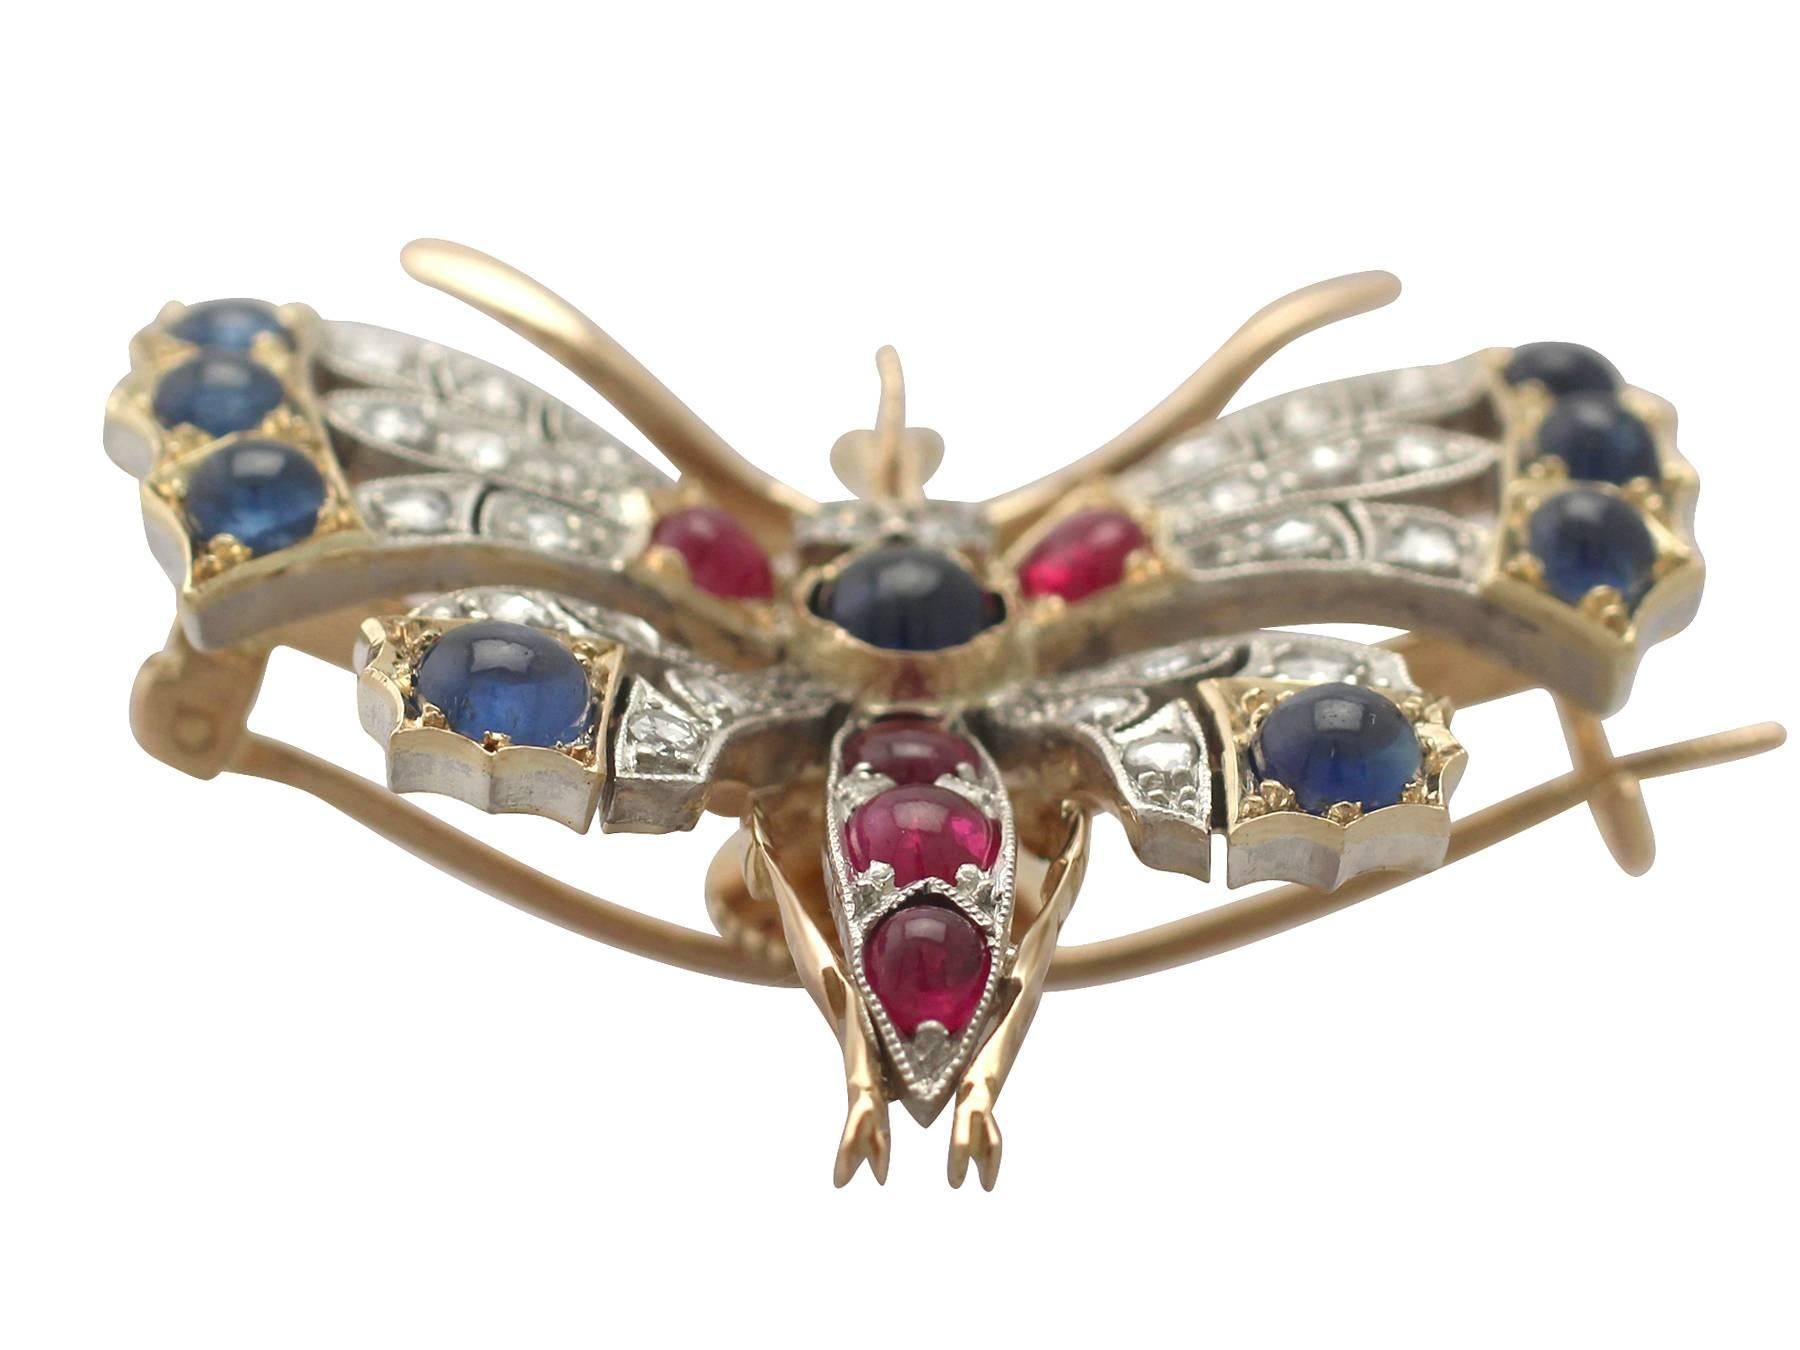 A stunning, fine and impressive 1.46 carat diamond, 2.62 carat sapphire and 1.10 carat ruby and 18 karat yellow gold butterfly brooch with a silver setting; part of our diverse antique jewellery and estate jewelry collections

This impressive